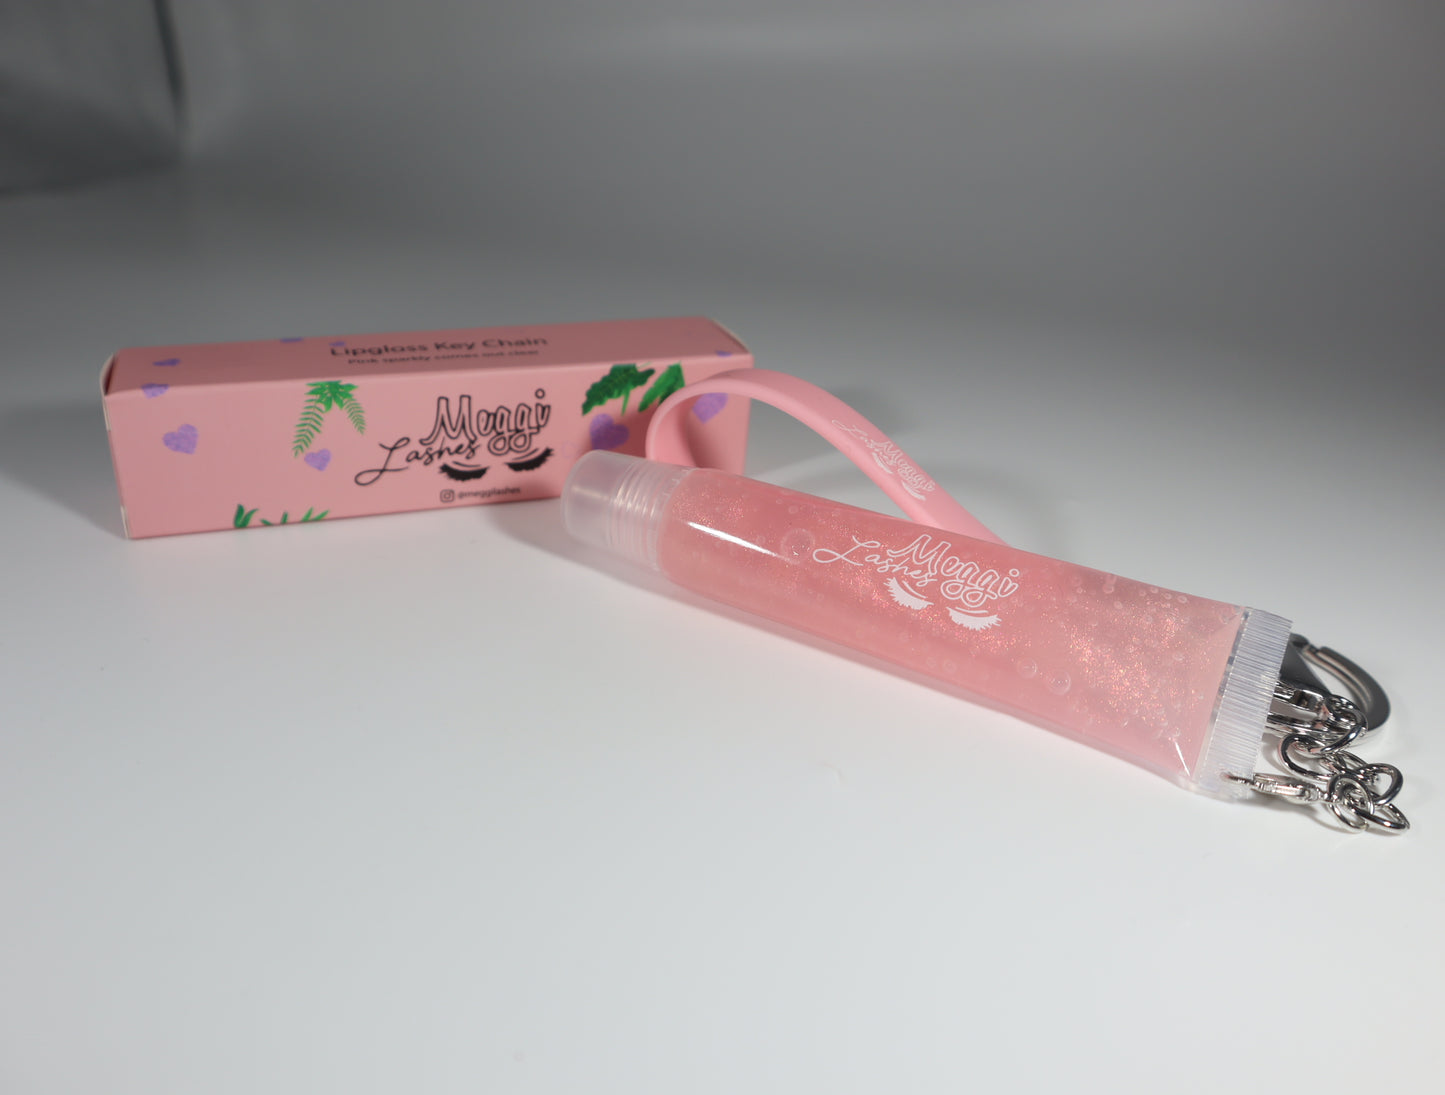 Cotton candy lipgloss keychain (candy floss)